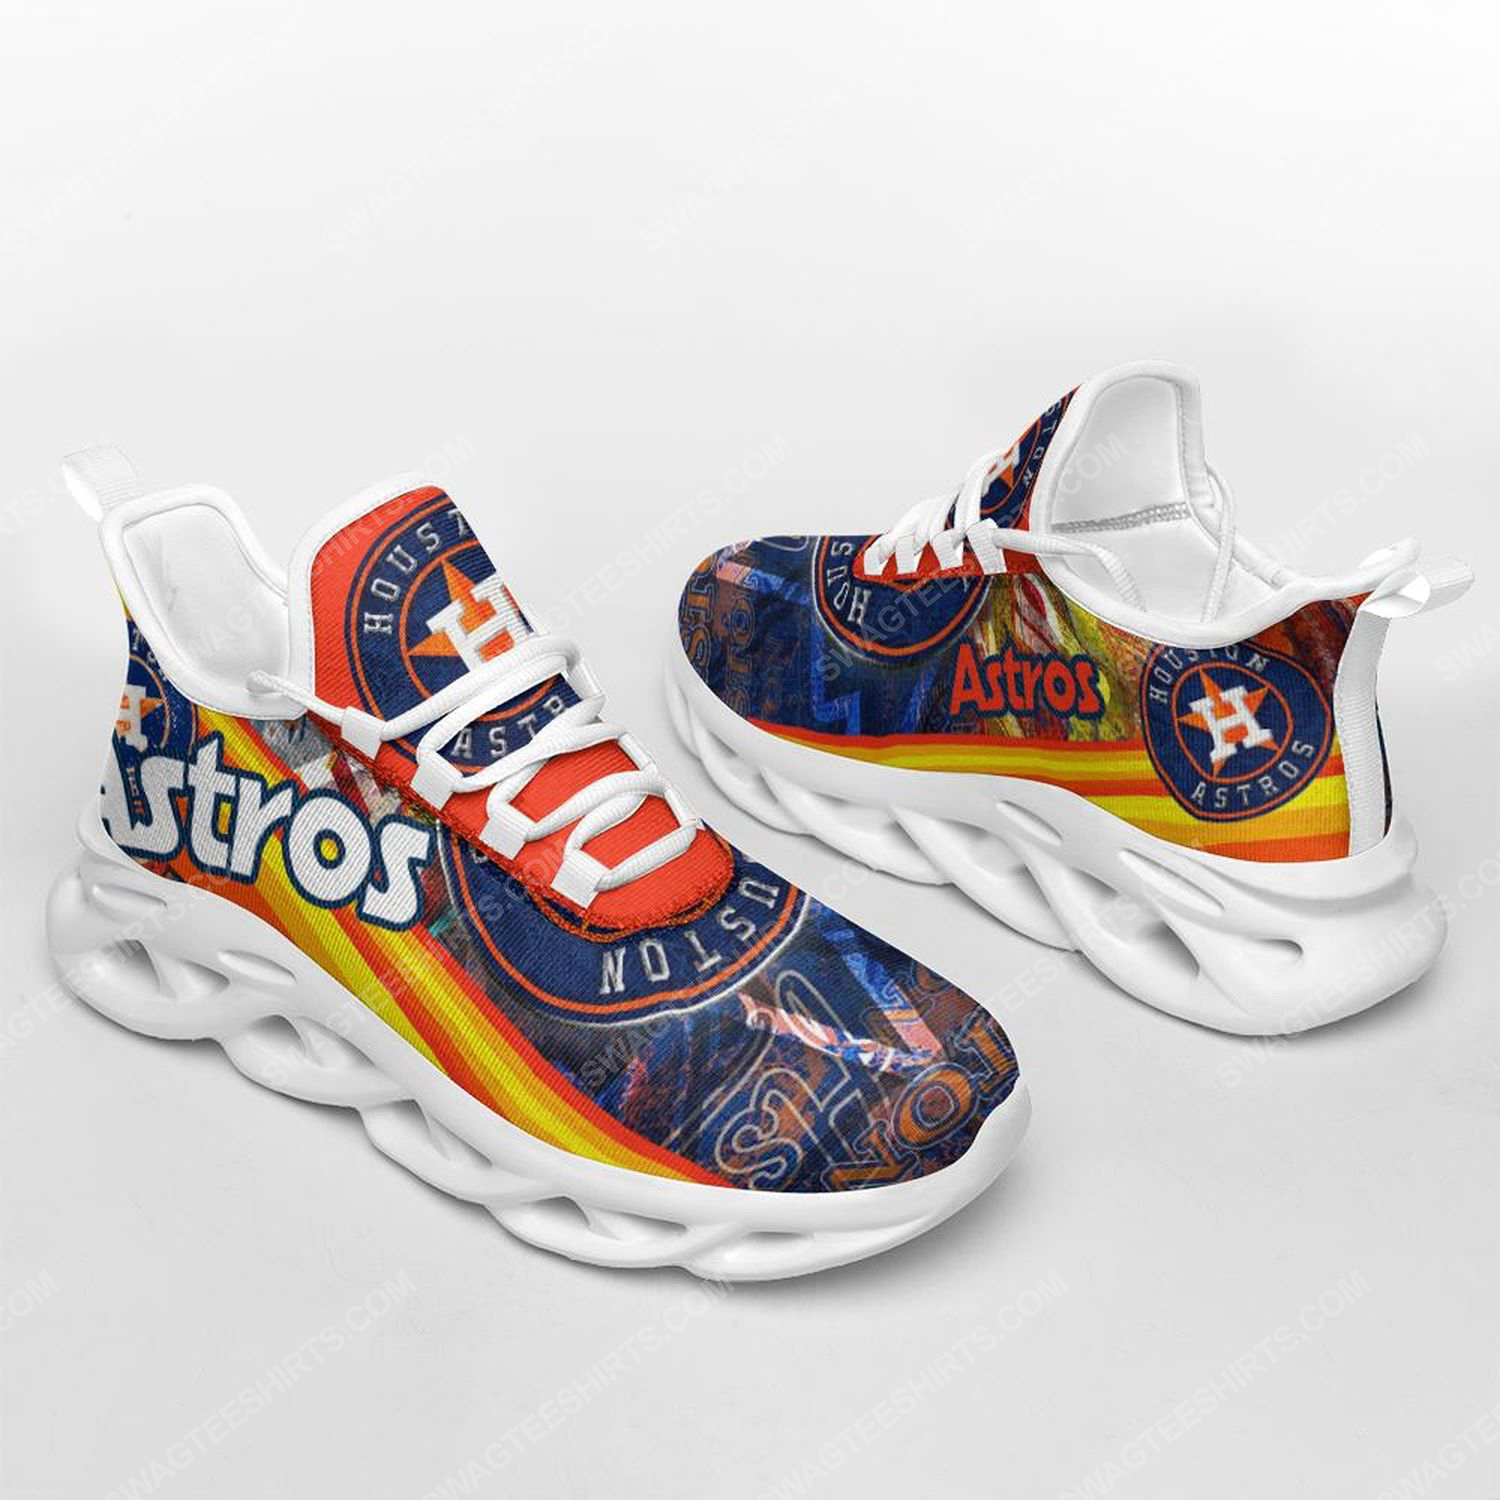 [special edition] The houston astros baseball team max soul shoes – Maria